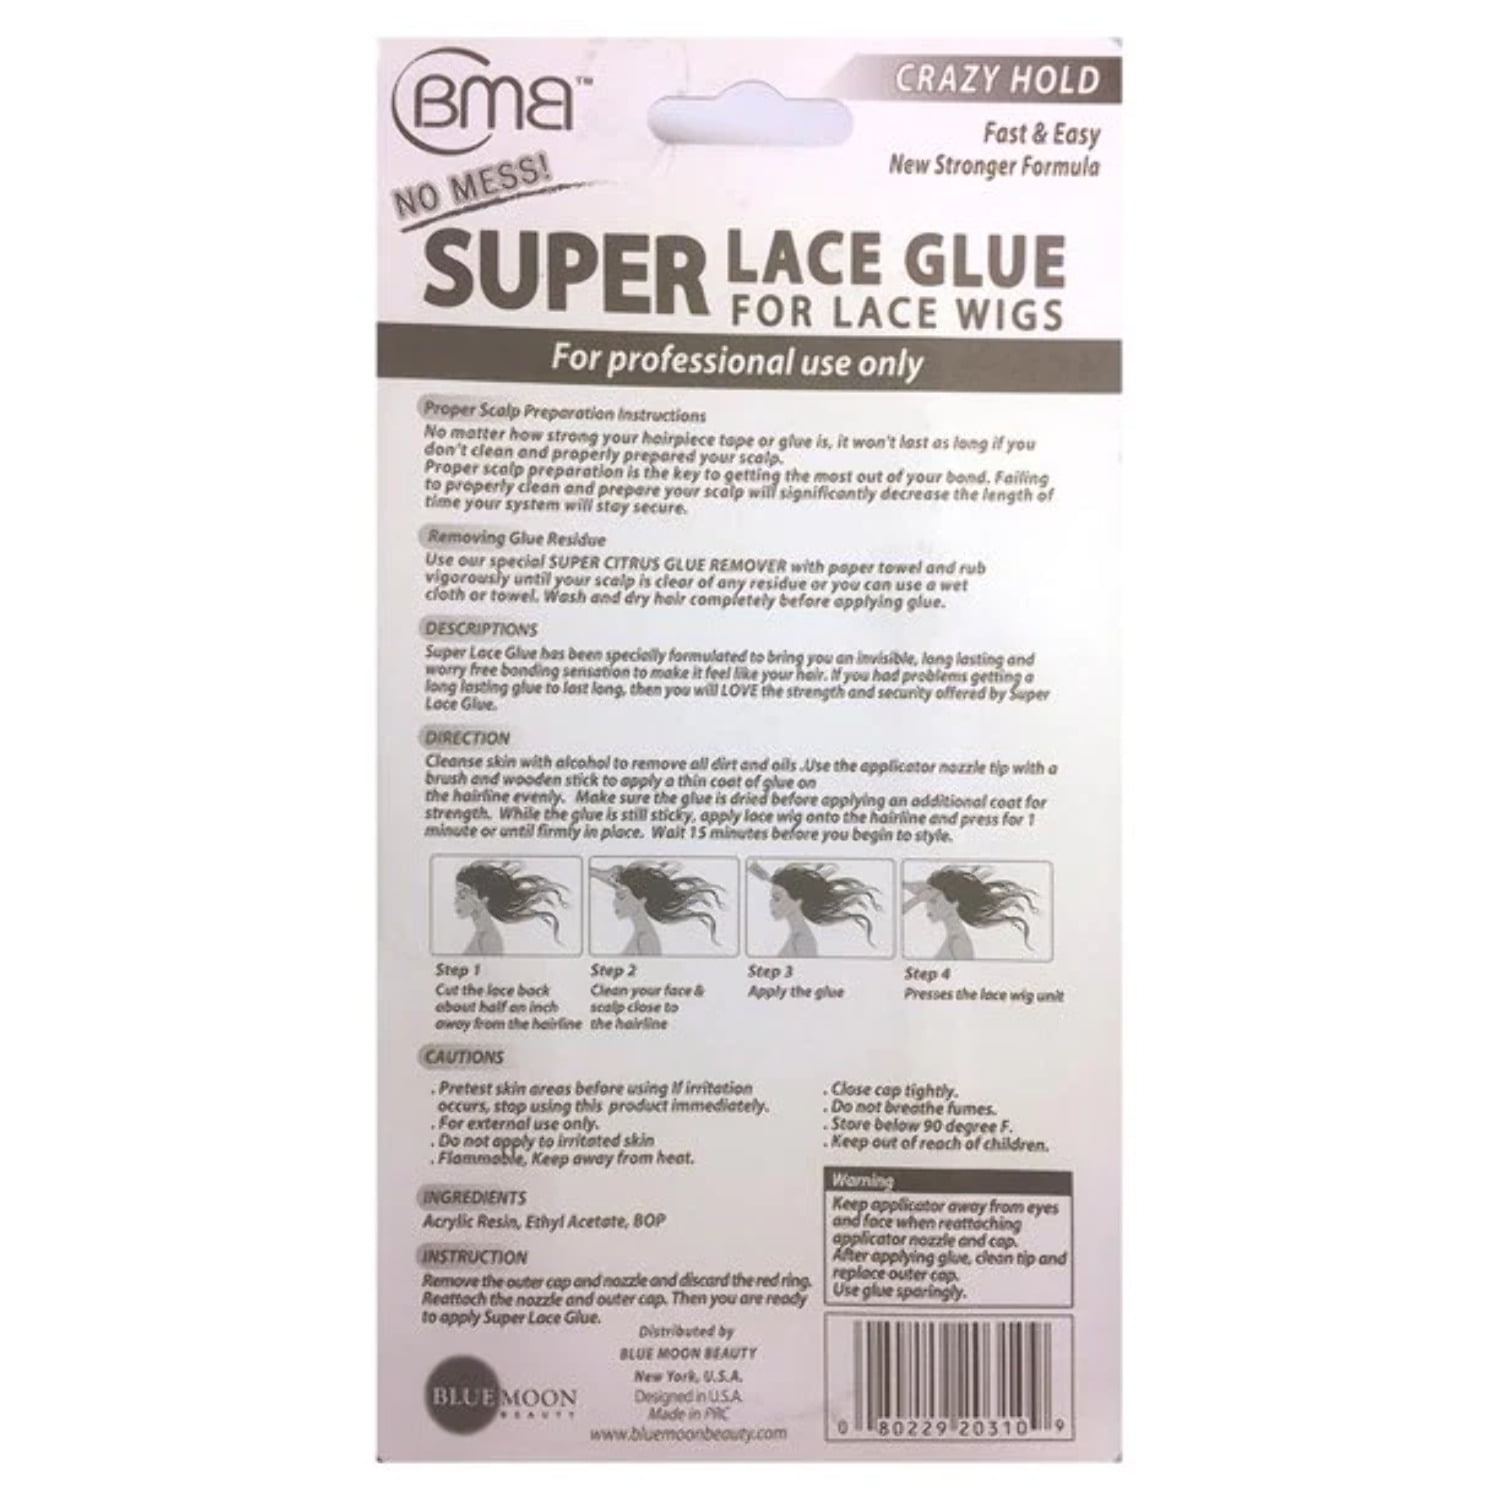 BMB CRAZY HOLD TUBE SUPER LACE GLUE ADHESIVE 0.4 OZ STRONG HOLD LACE GLUE  FOR WIGS (TUBE 1 PACK)